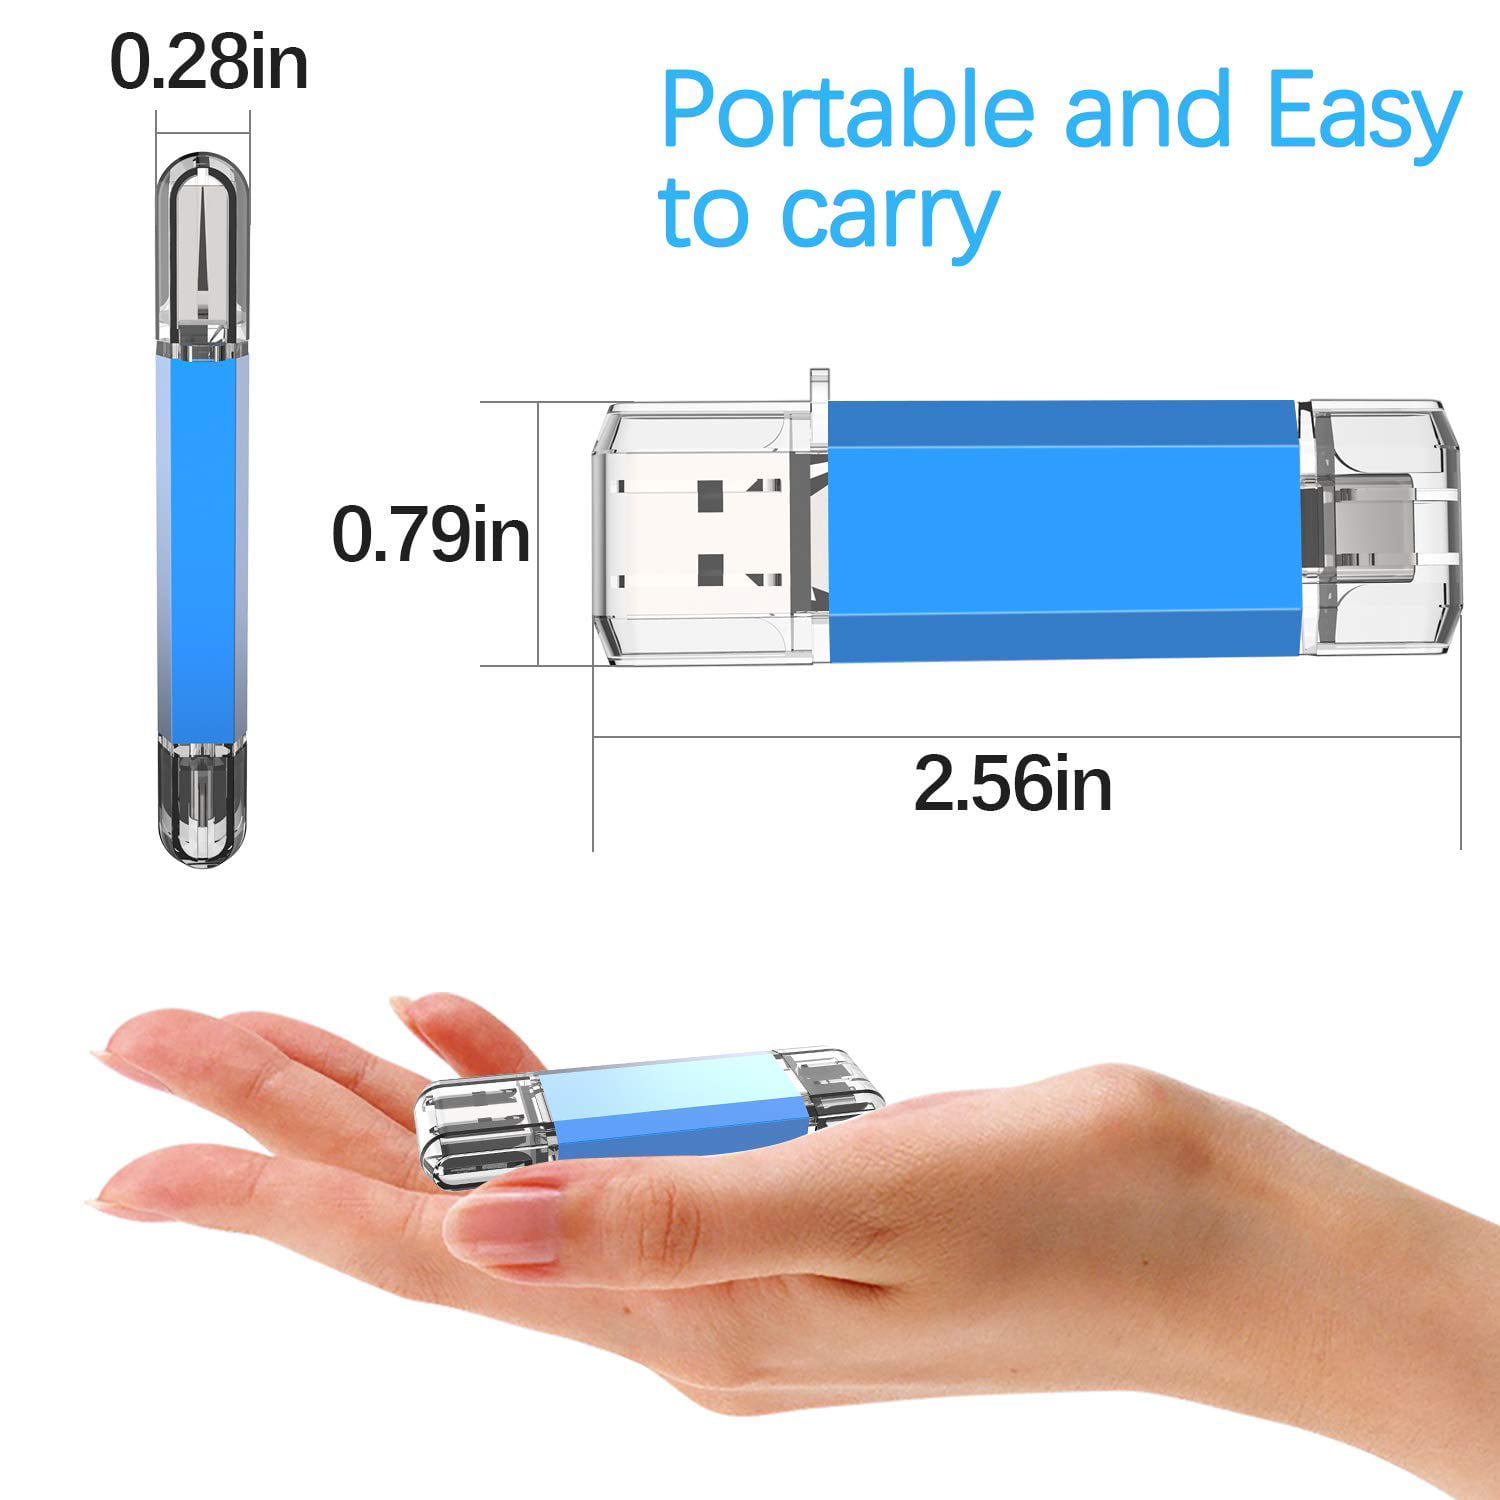 USB Flash Drive for iPhone, 256GB Photo Storage , WOFICLO External Memory  Stick for iPad Compatible iOS Lightning/Mac Type-c/PC USB3.0/Android Micro  and USB-c (256GB,Sliver) (Color: Sliver, Tamaño: 256GB)